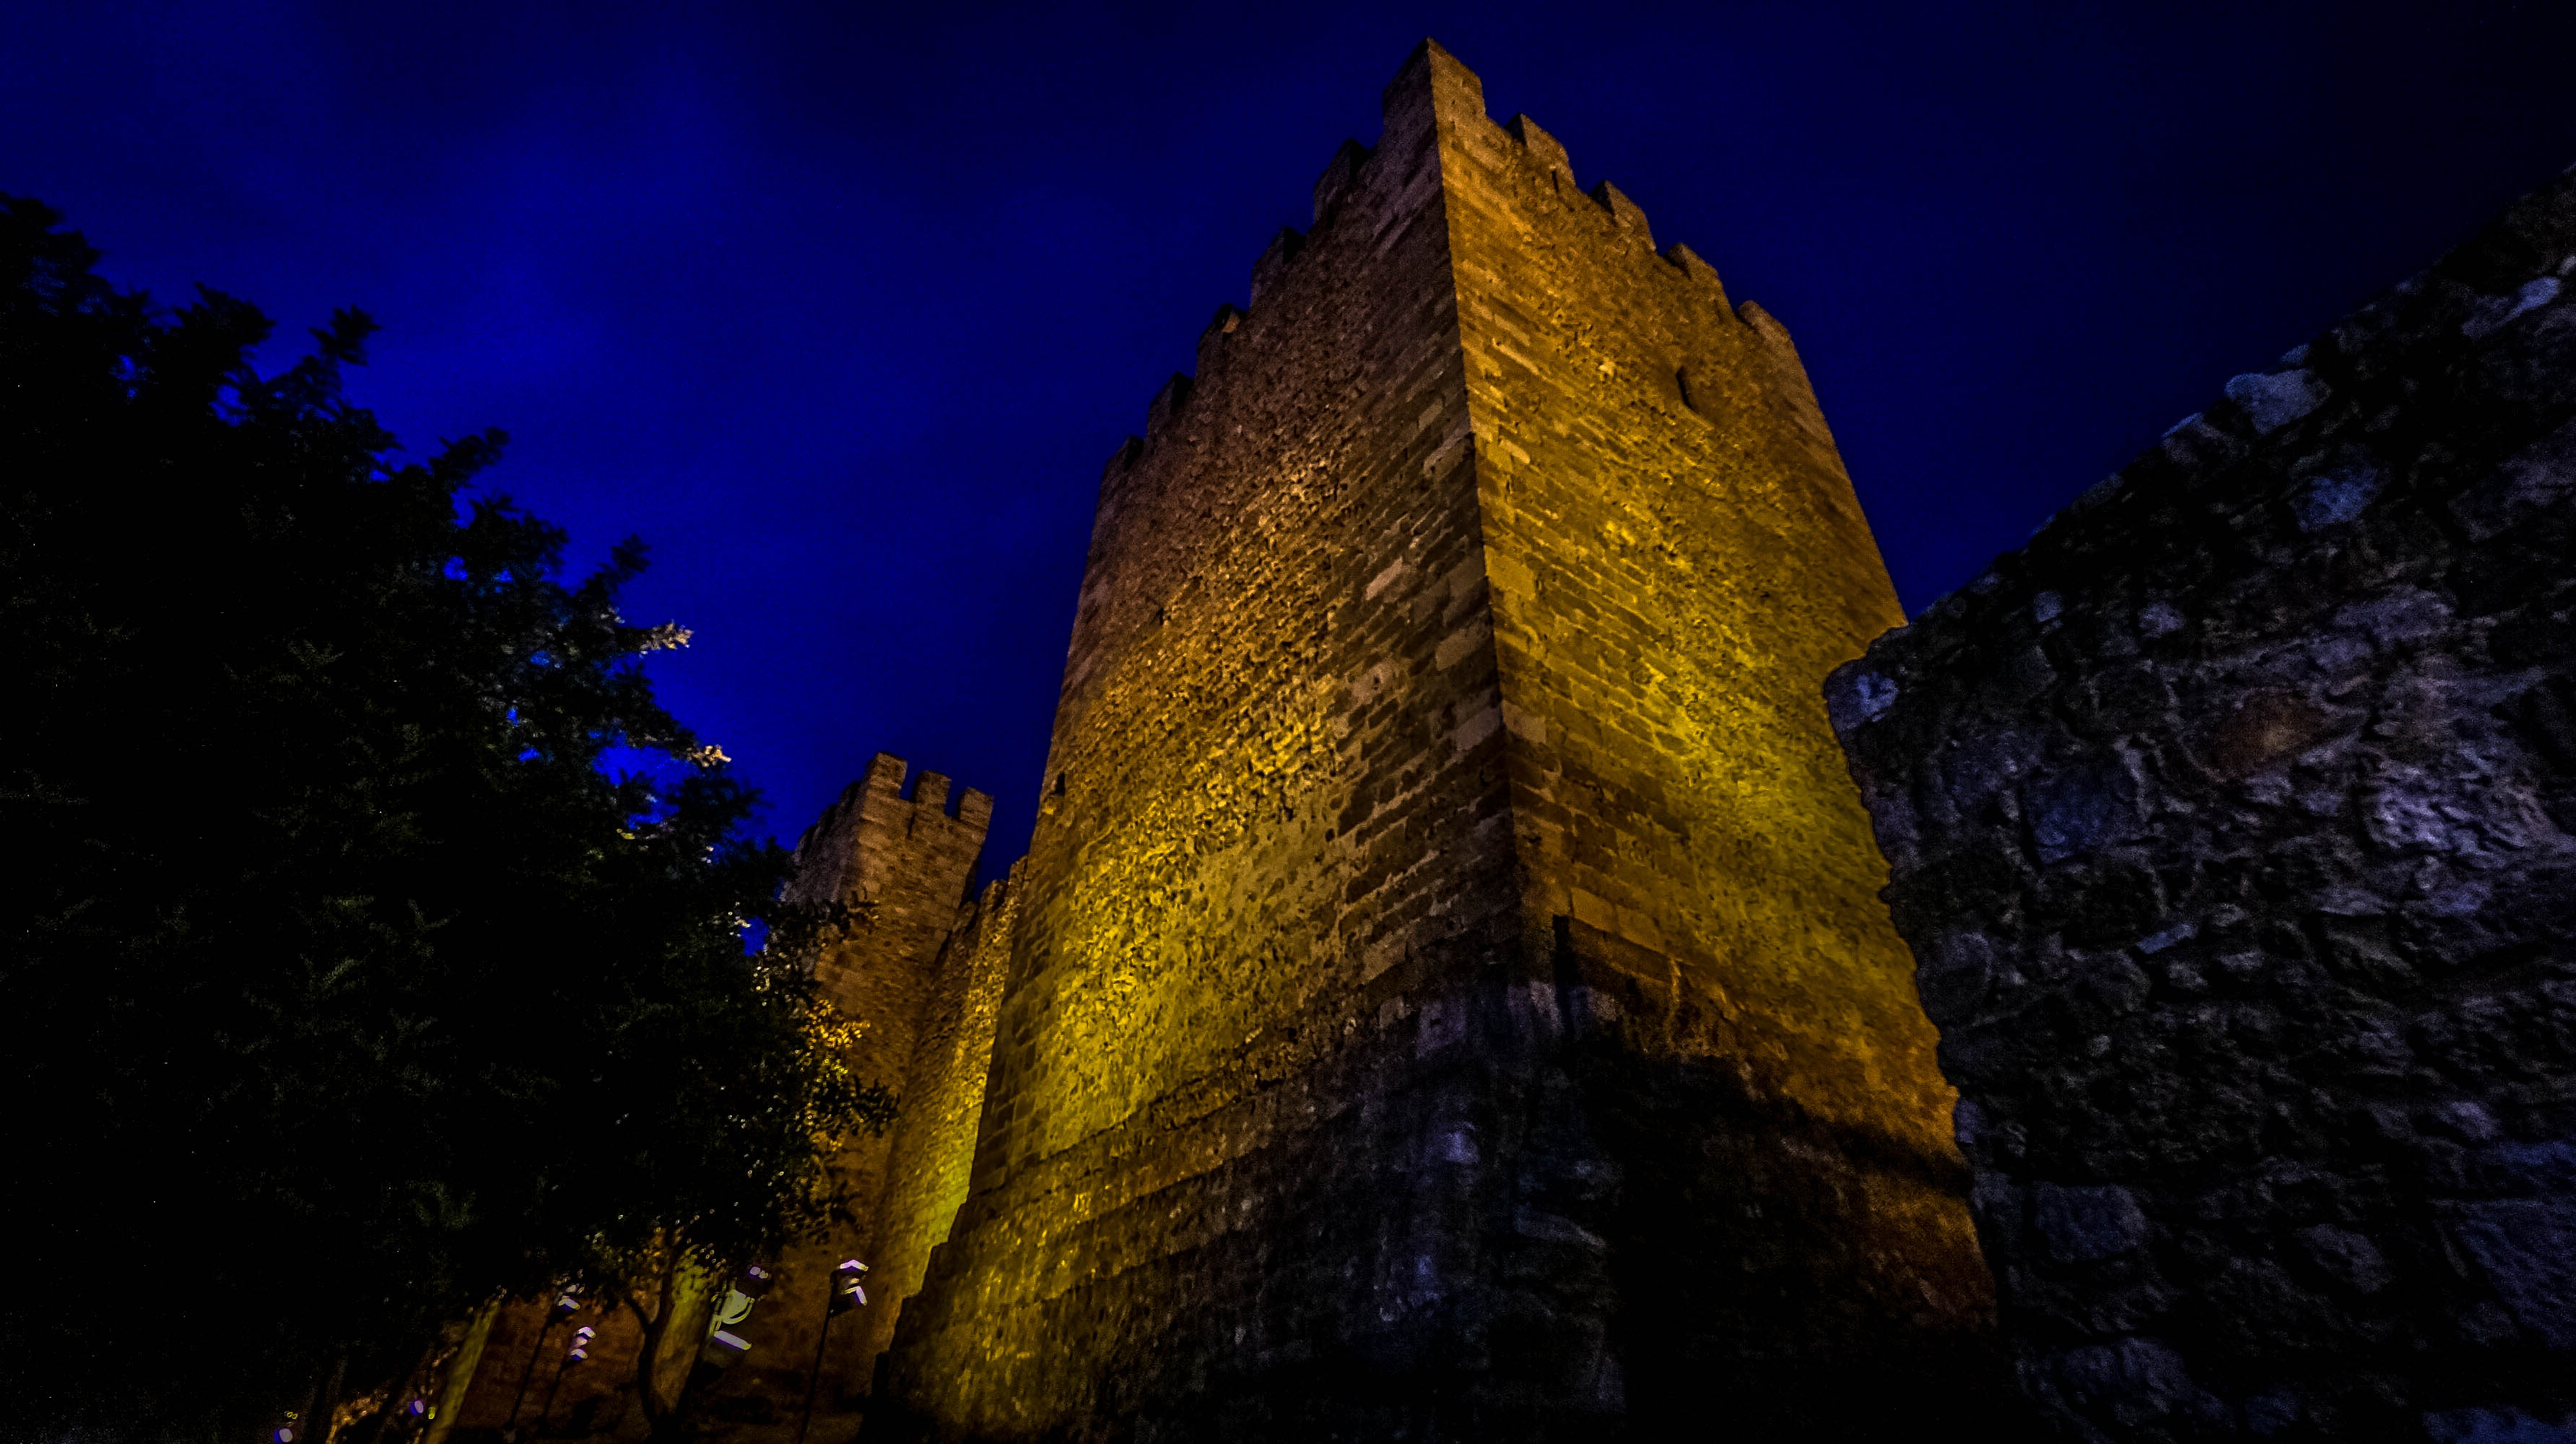 The Castle at Night